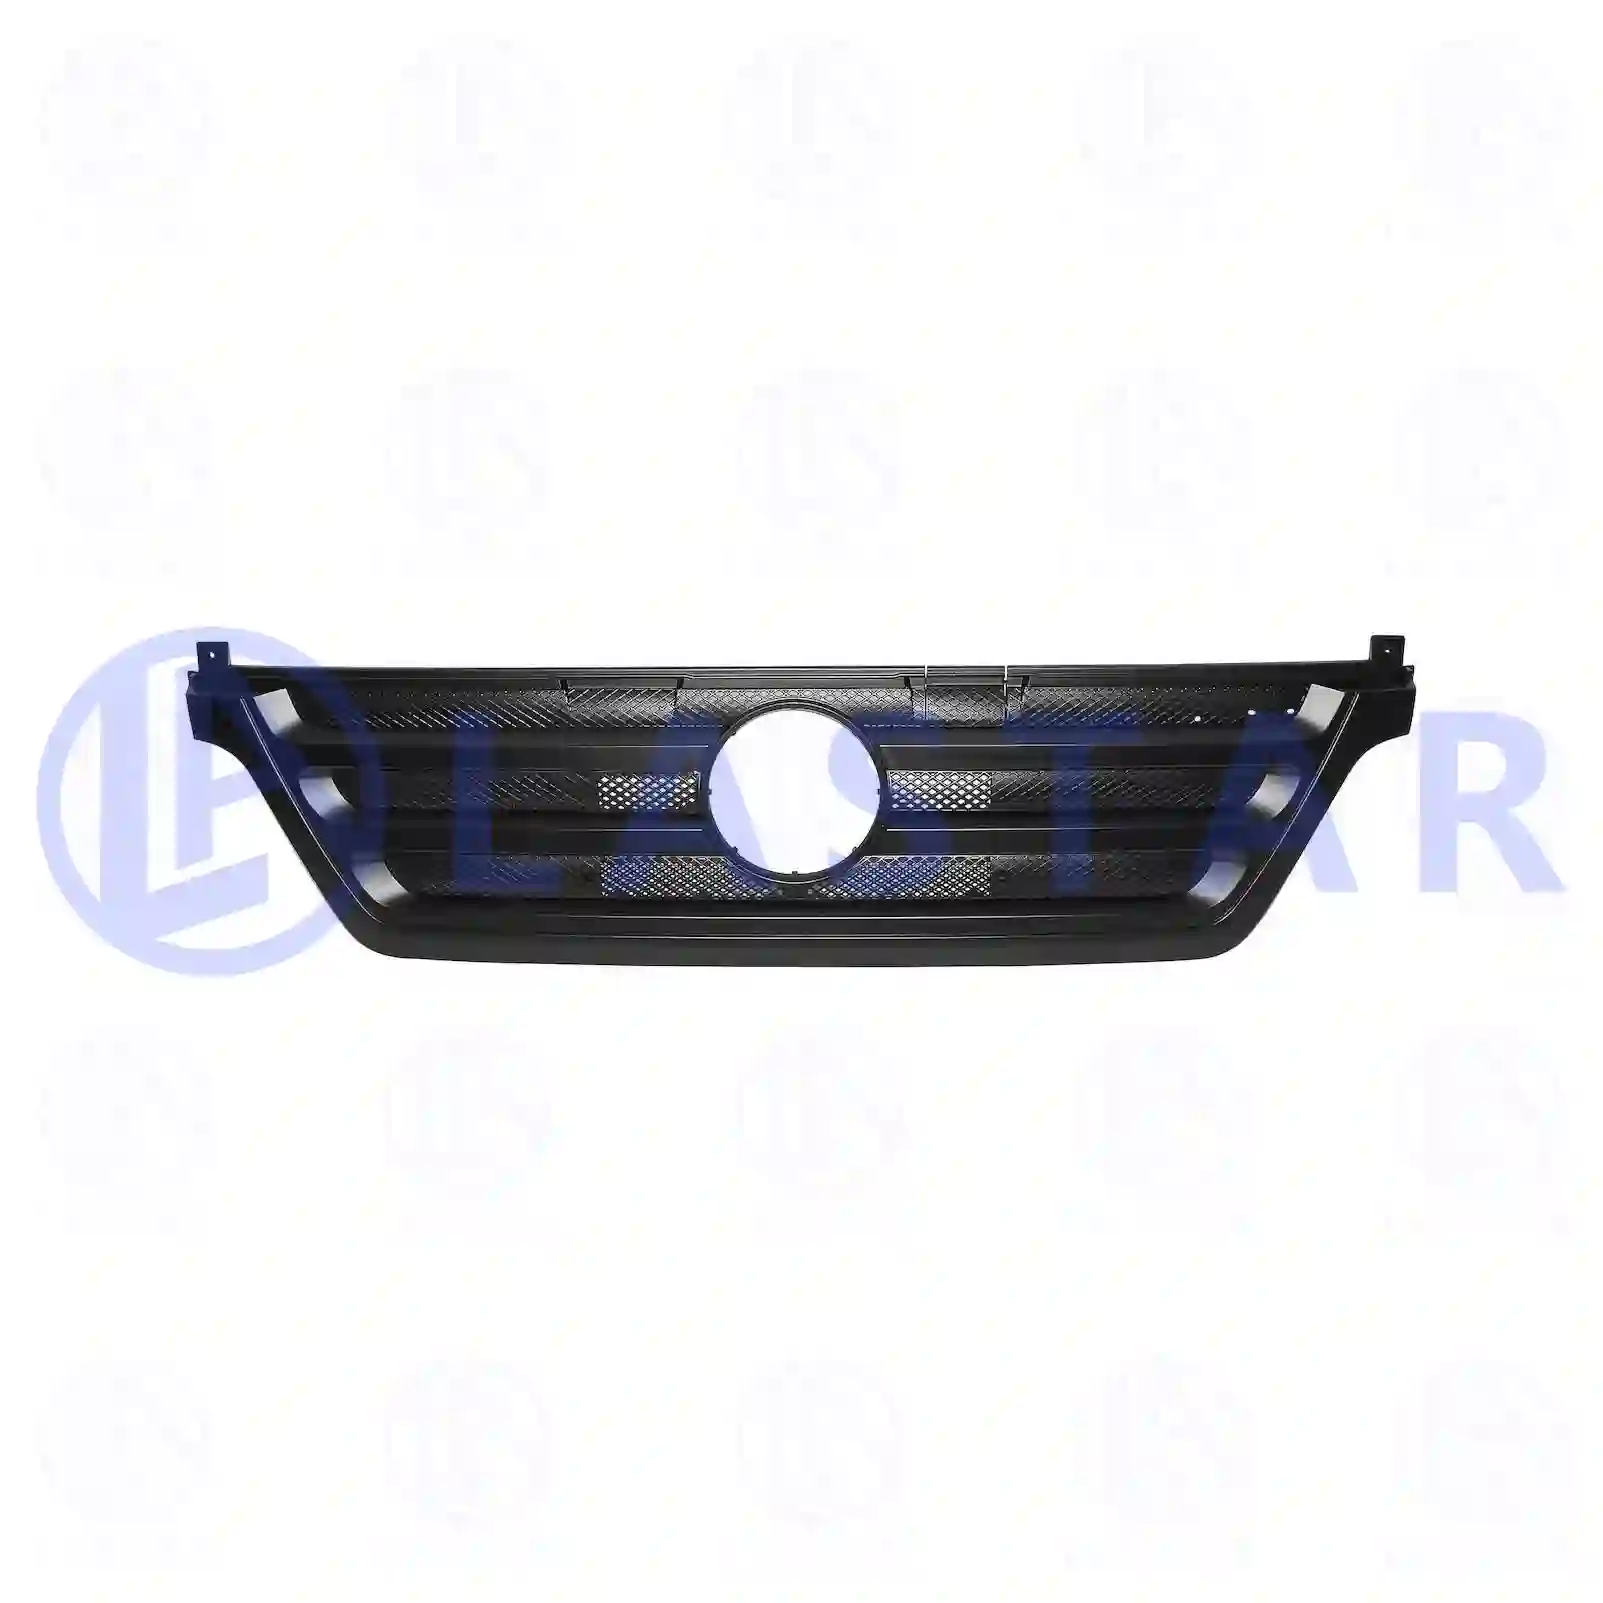 Front grill, 77719501, 9448800085 ||  77719501 Lastar Spare Part | Truck Spare Parts, Auotomotive Spare Parts Front grill, 77719501, 9448800085 ||  77719501 Lastar Spare Part | Truck Spare Parts, Auotomotive Spare Parts